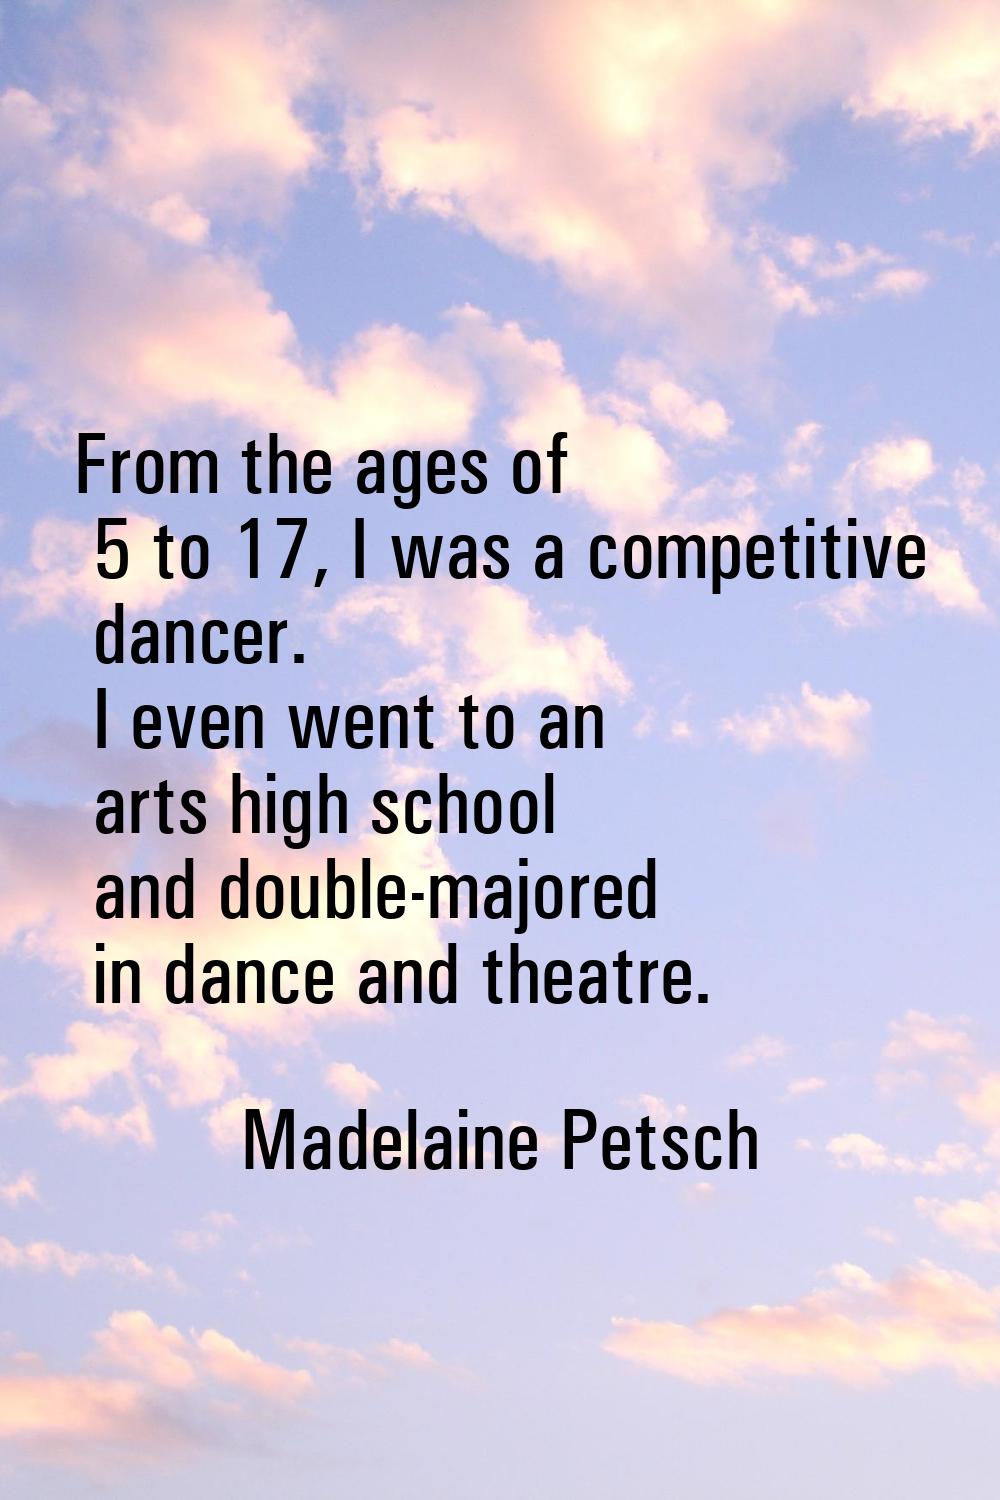 From the ages of 5 to 17, I was a competitive dancer. I even went to an arts high school and double